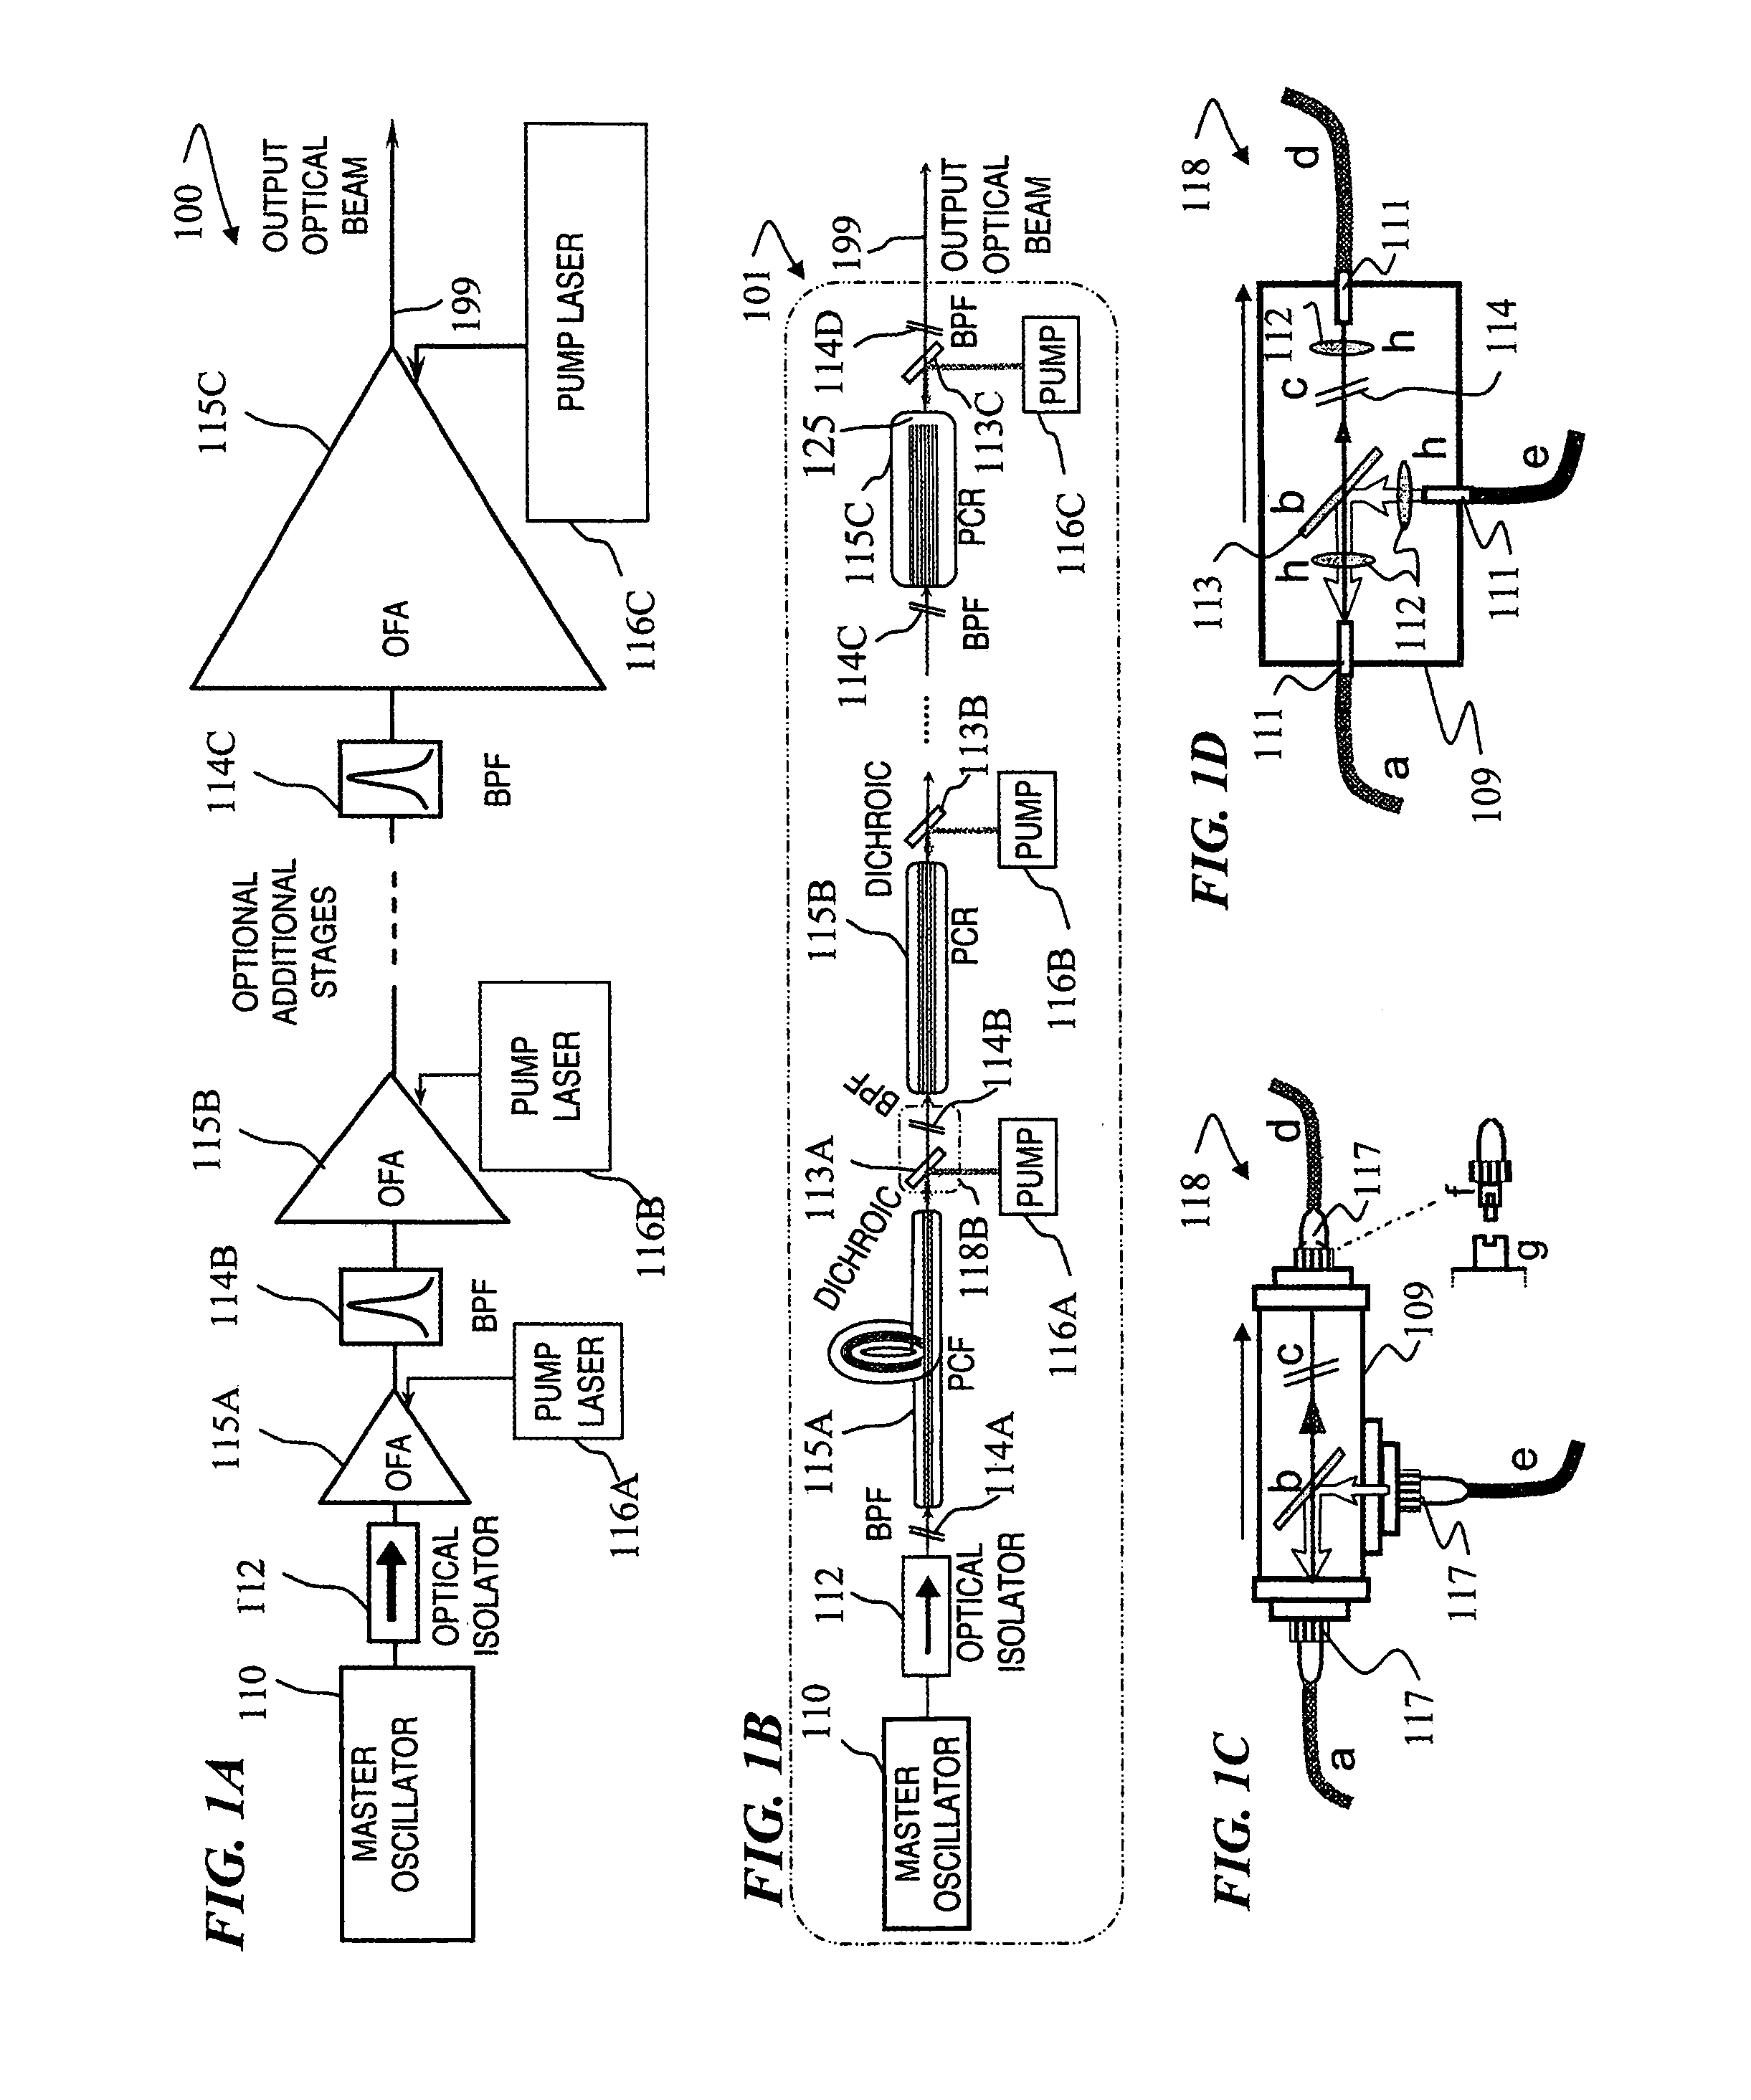 Photonic-crystal-rod amplifiers for high-power pulsed optical radiation and associated method